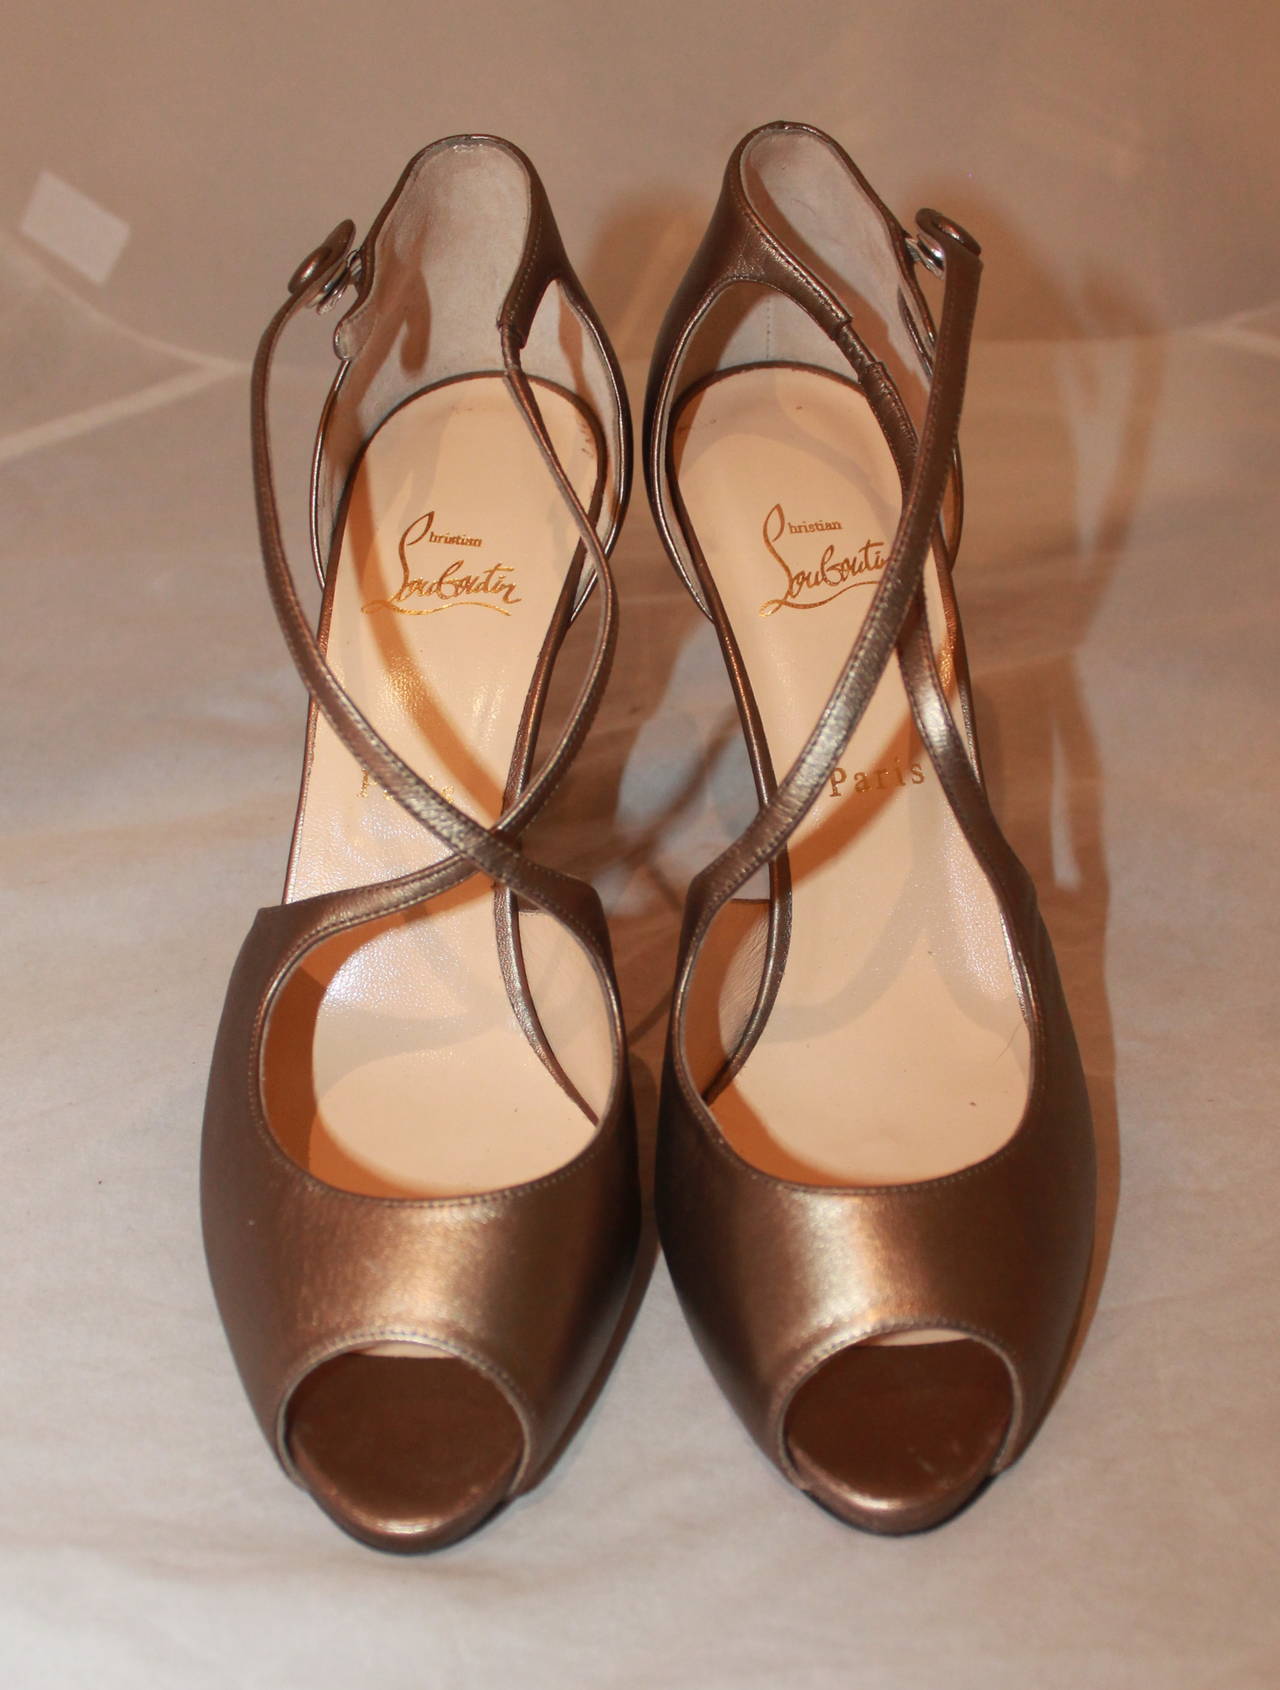 Christian Louboutin Bronze Leather Peep Toe Shoes - 42. These shoes are in excellent condition and have never been worn.